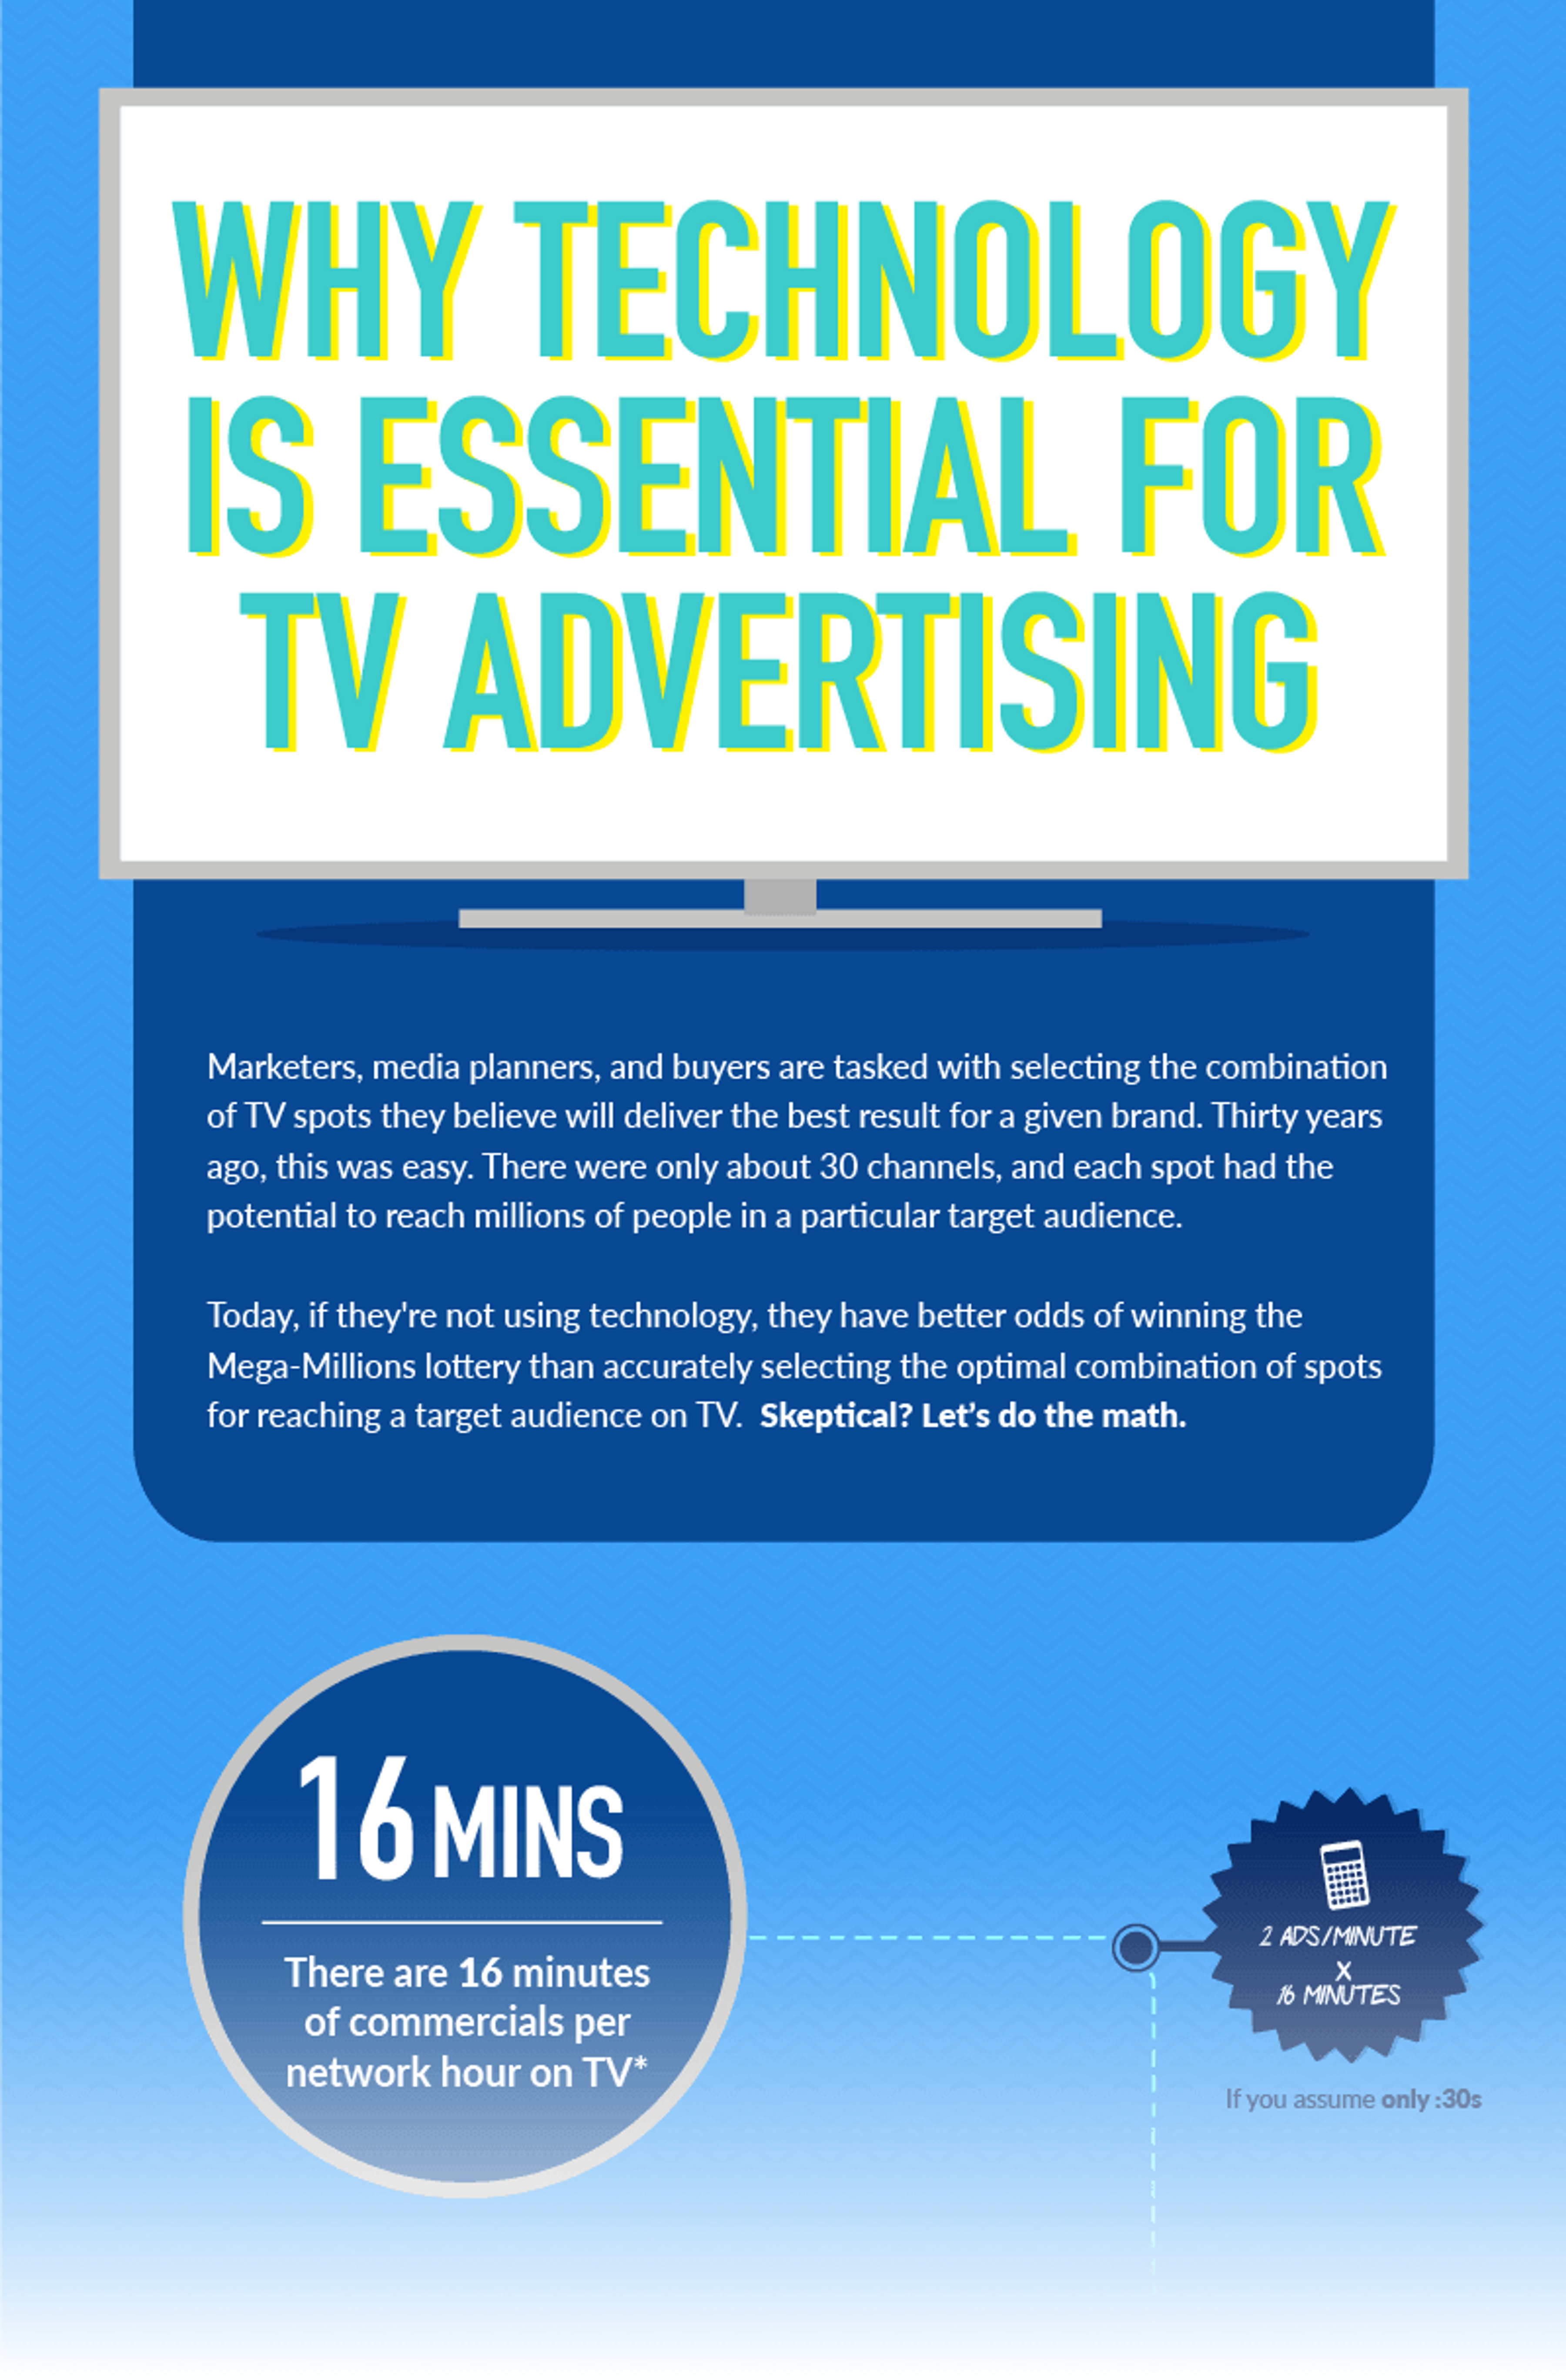 Image of Why Technology Is Essential for TV Advertising infographic.